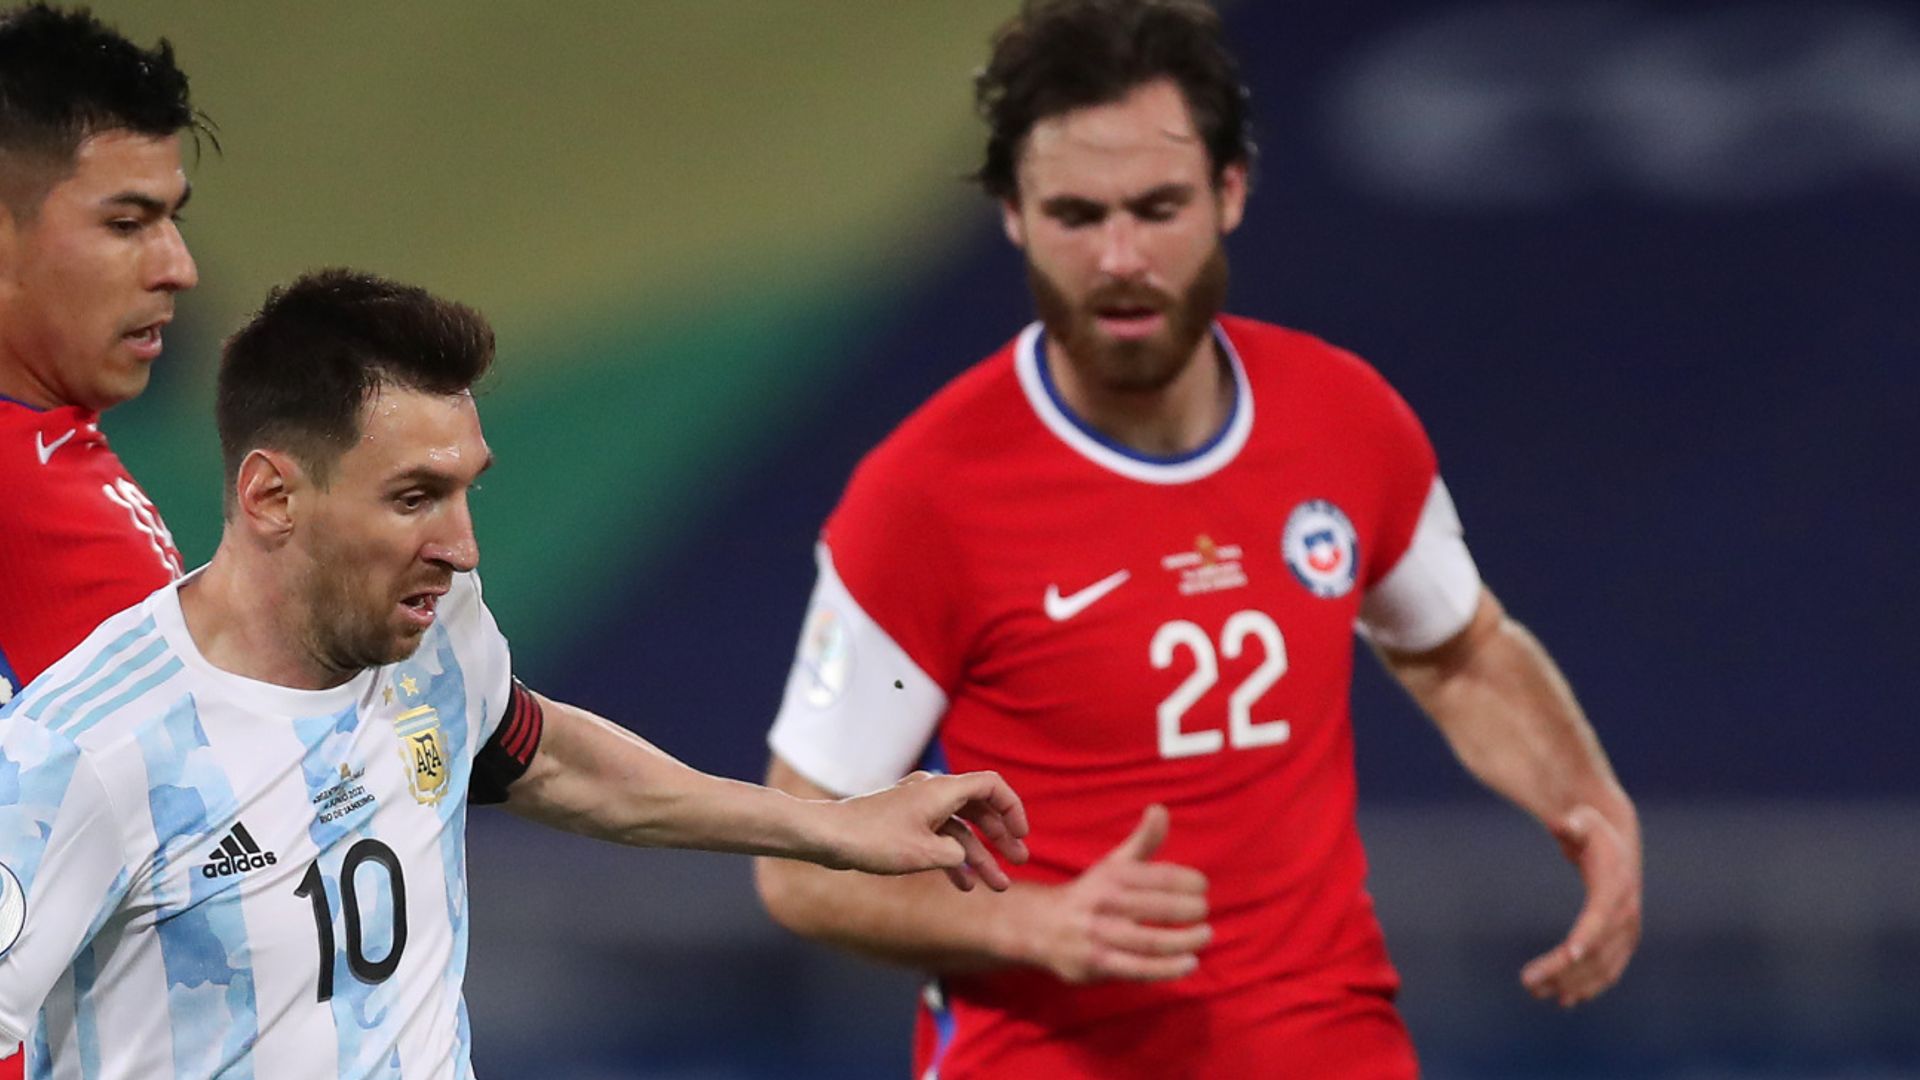 Brereton: From Blackburn to facing Messi with Chile